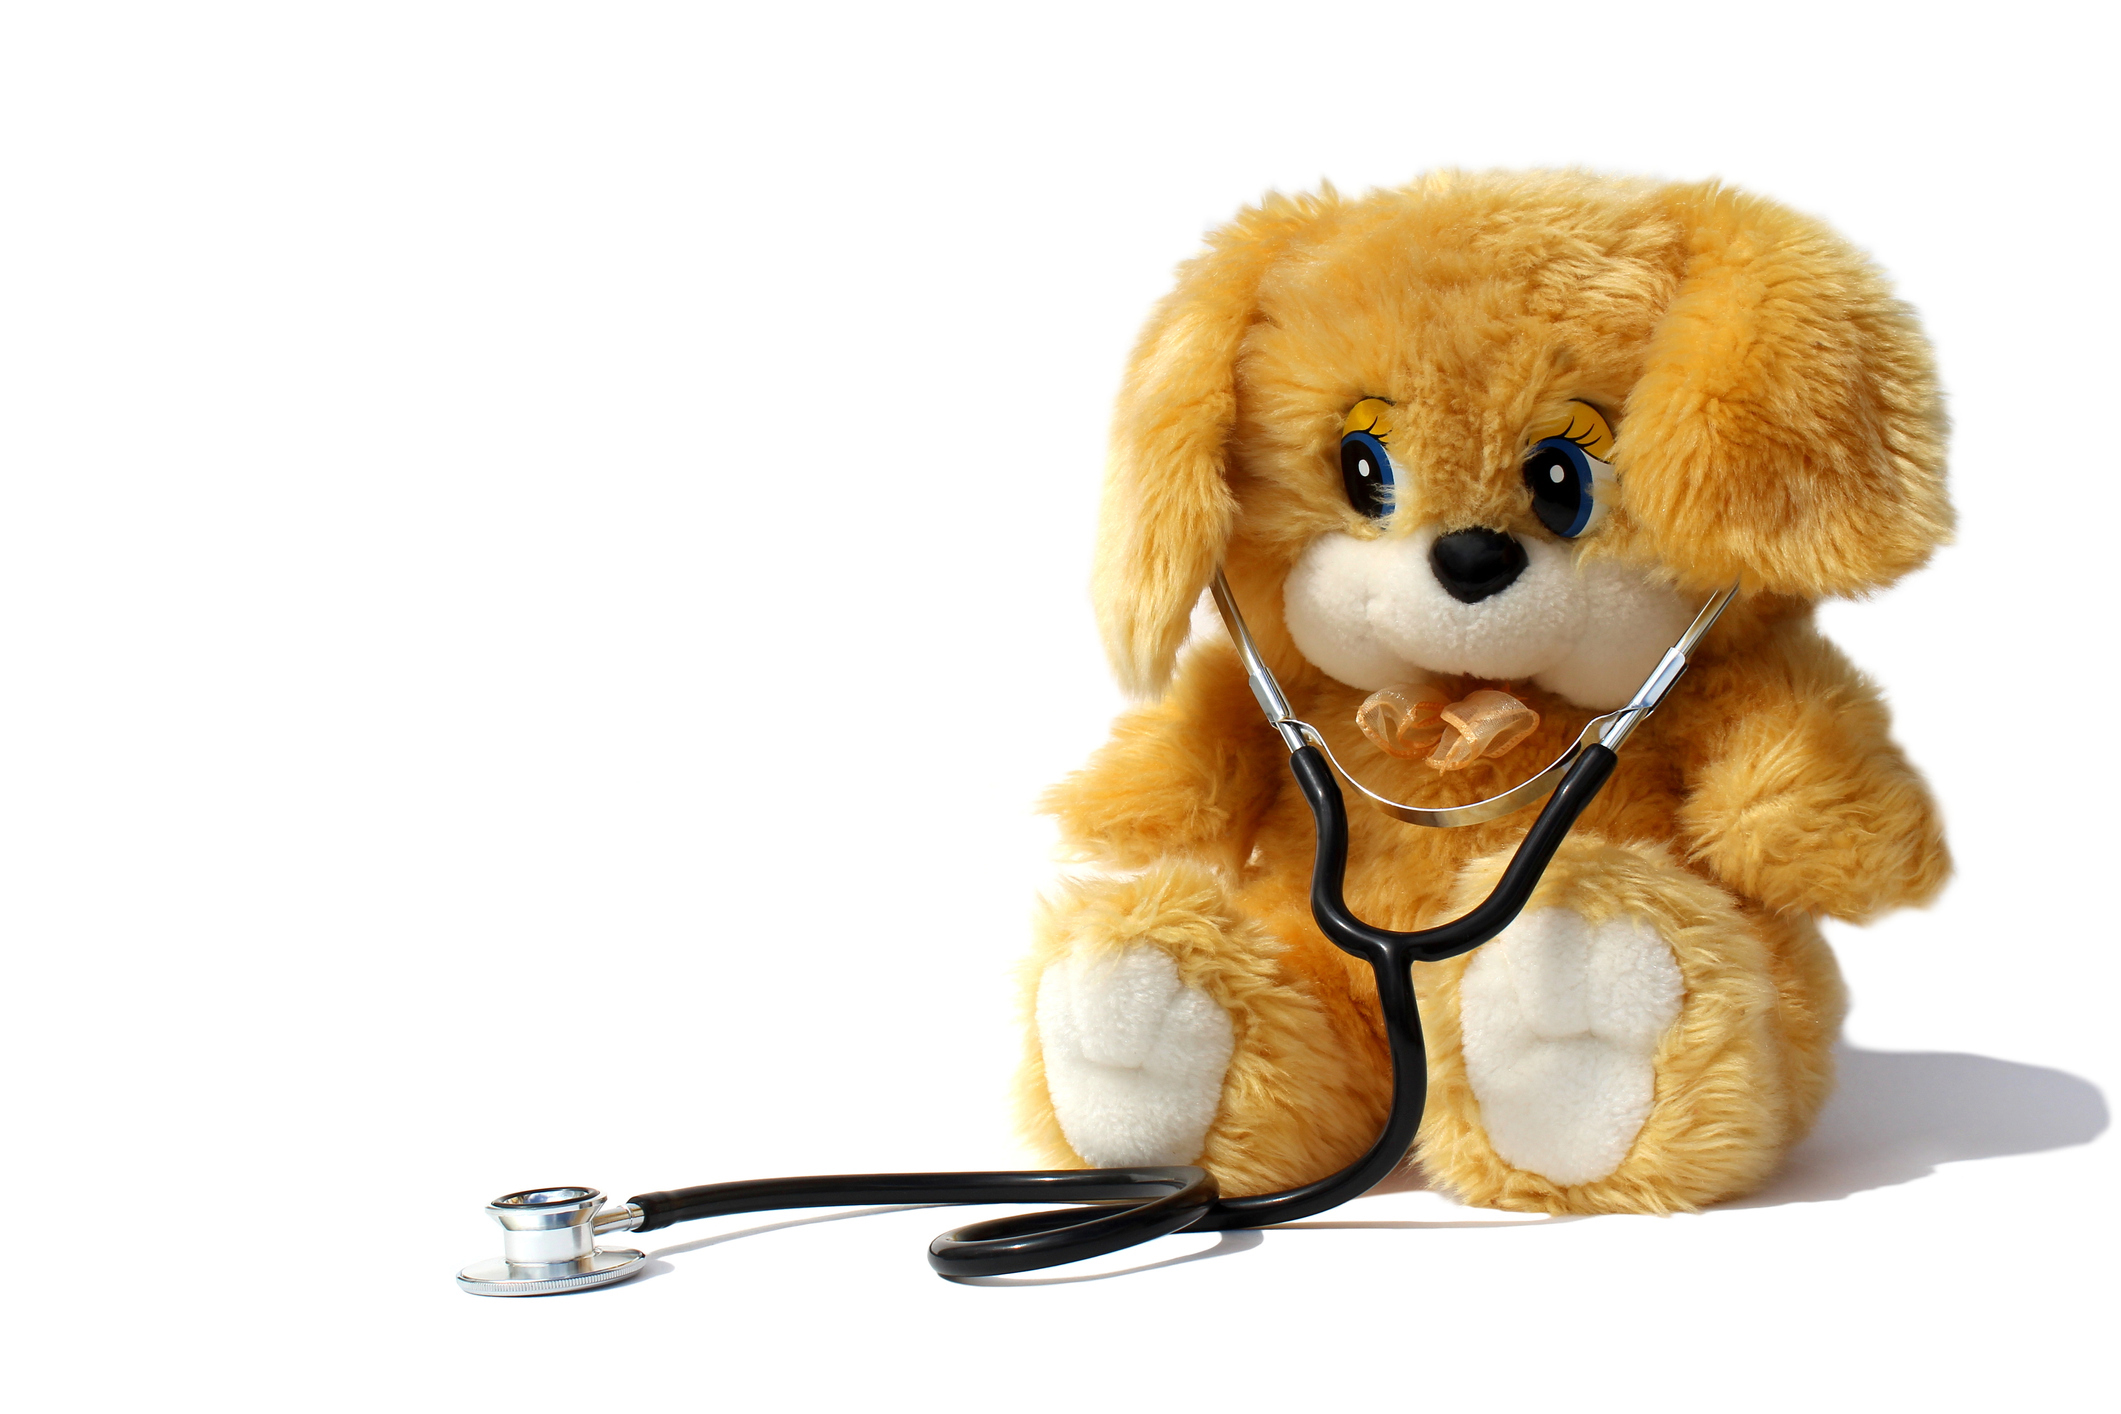 A toy dog sits on a white background with a stethoscope.